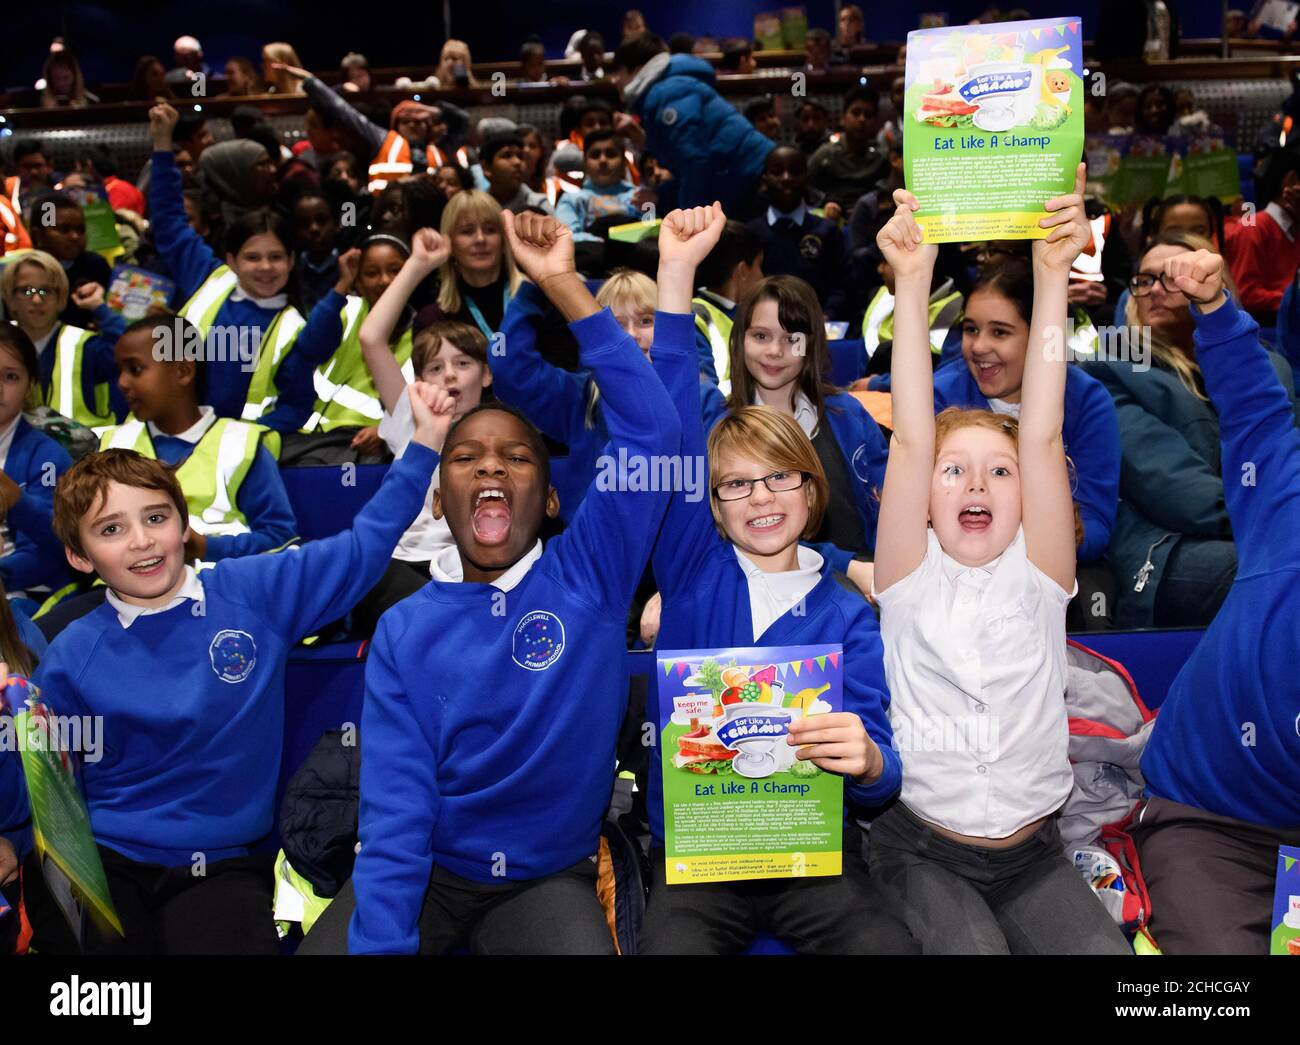 EDITORIAL USE ONLY Pupils and teachers from Newham at the Eat Like A Champ showcase, a free healthy eating education programme supported by Danone, which aims to promote good nutrition and lifestyle, at Stratford Circus Arts Centre in London.  Stock Photo